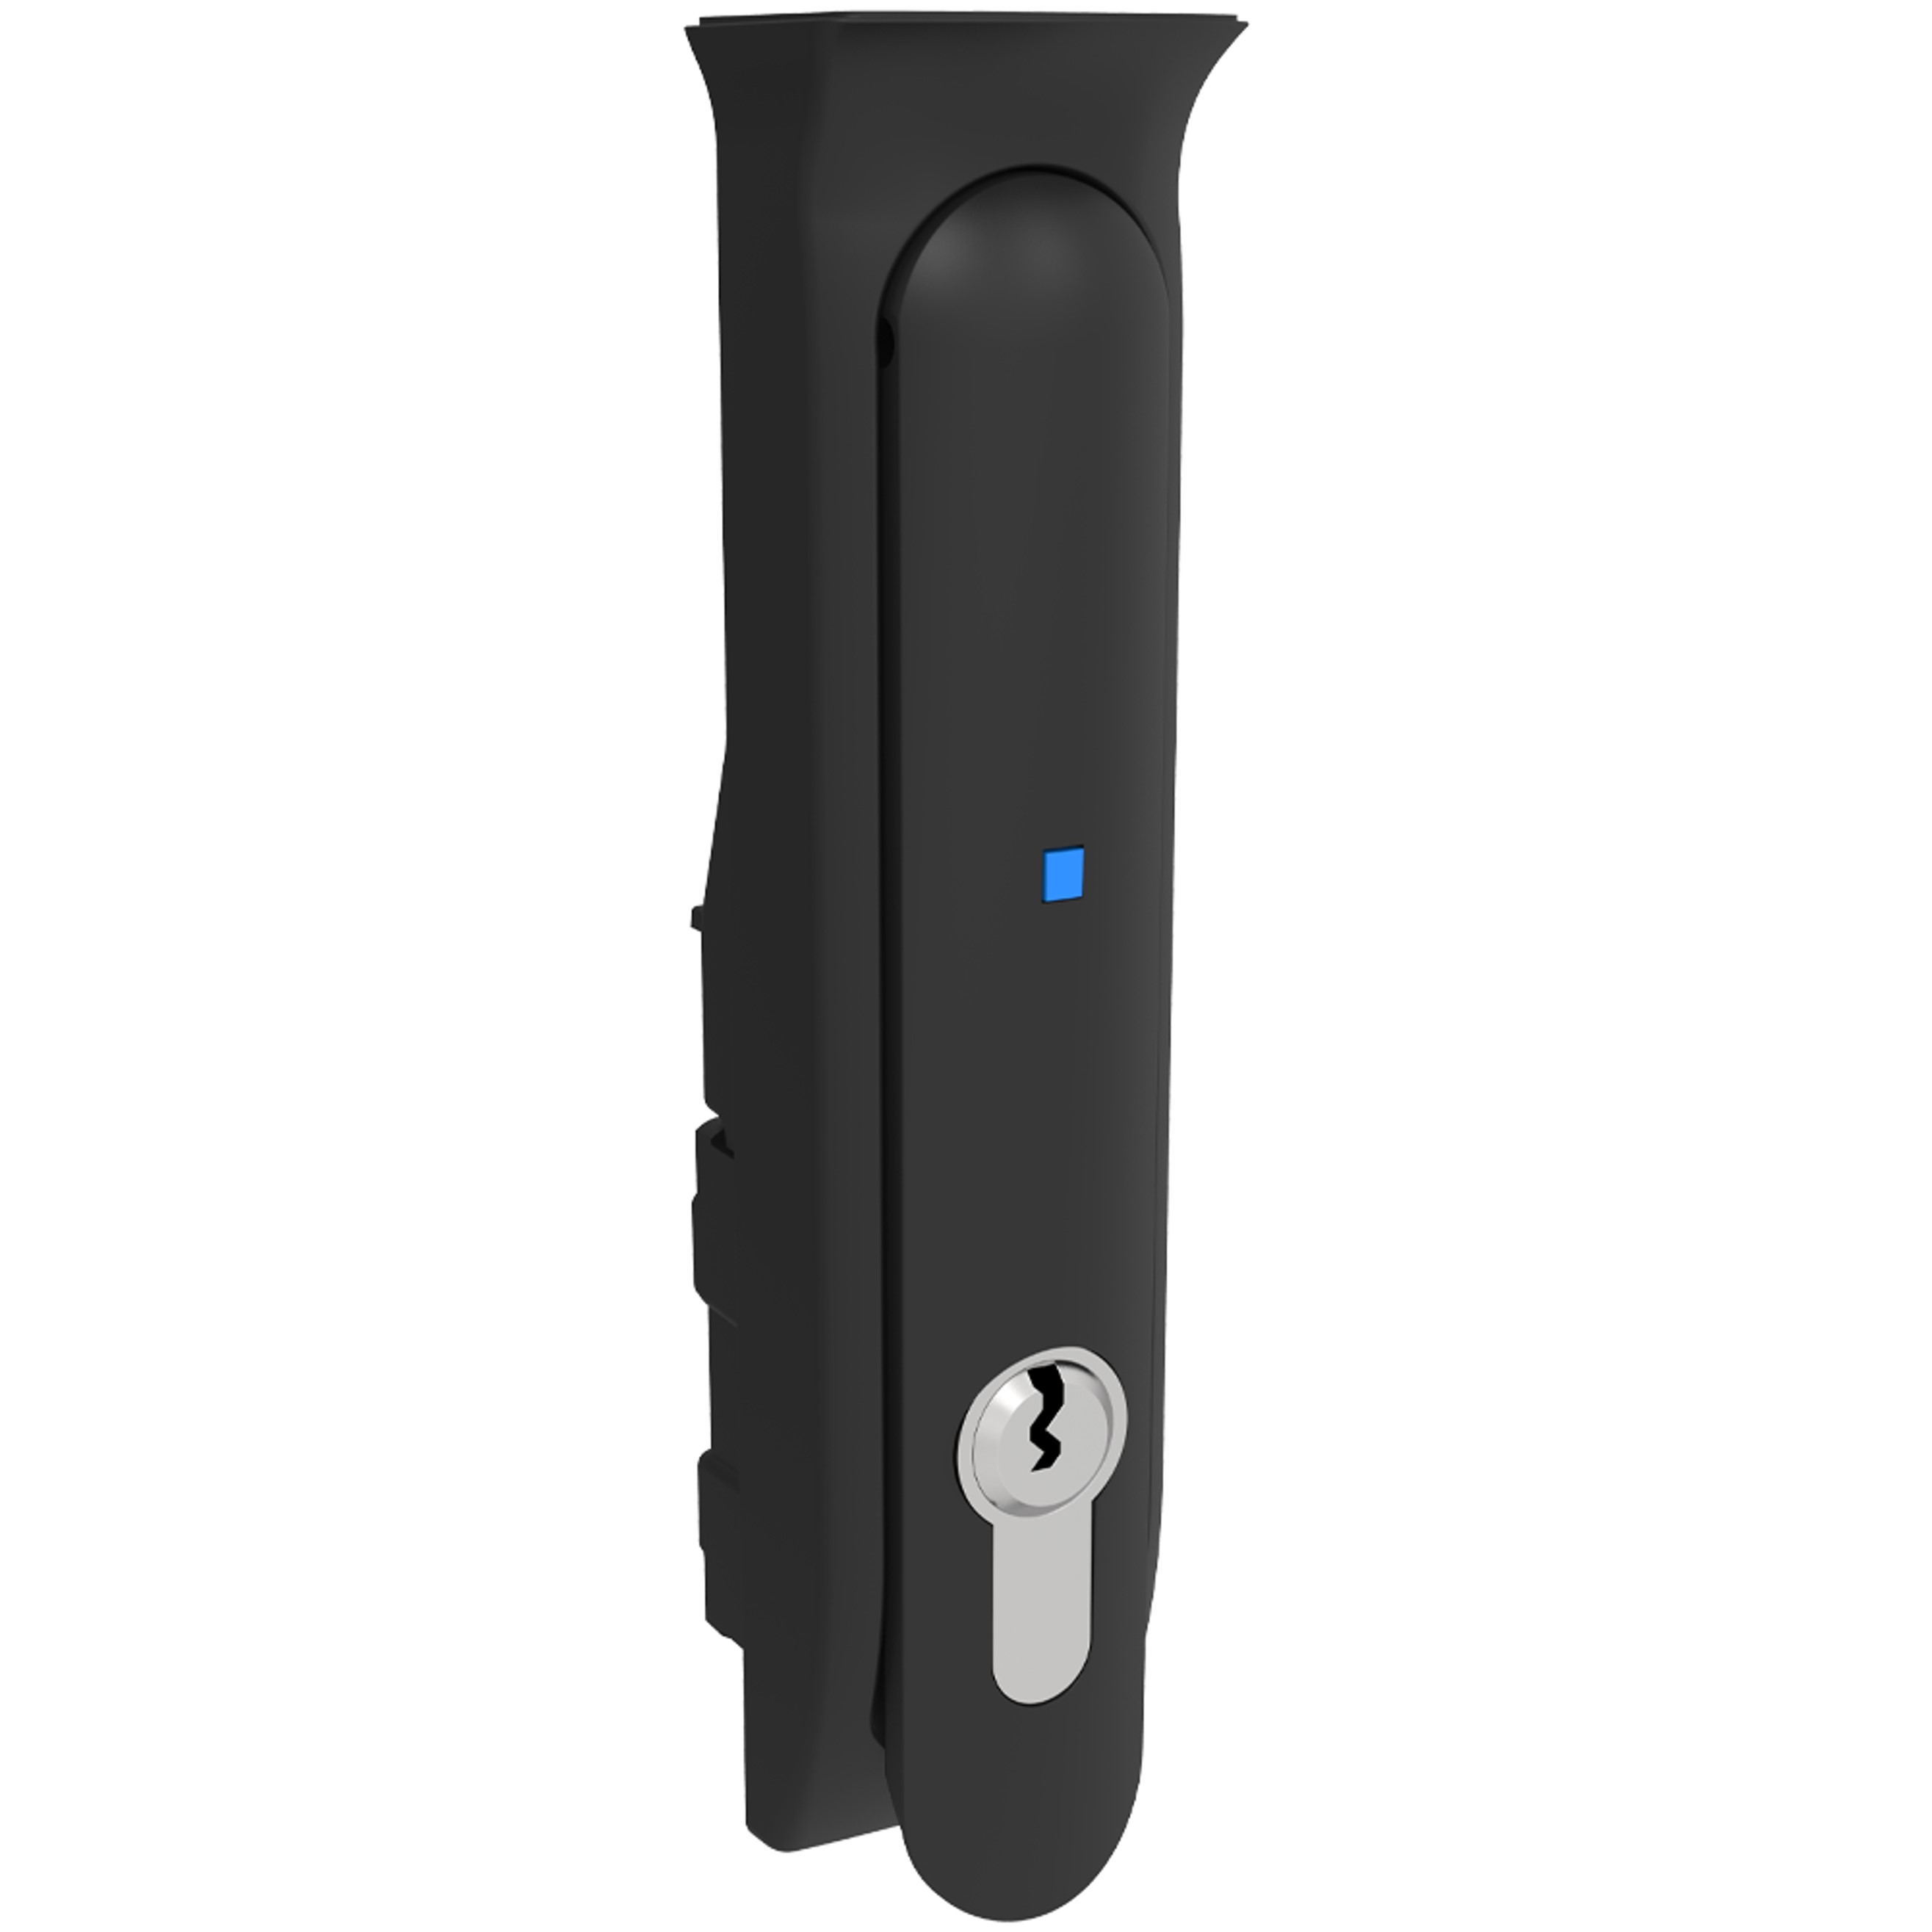 H3 Electronic Locking Swinghandle Latch With Modular Security Options